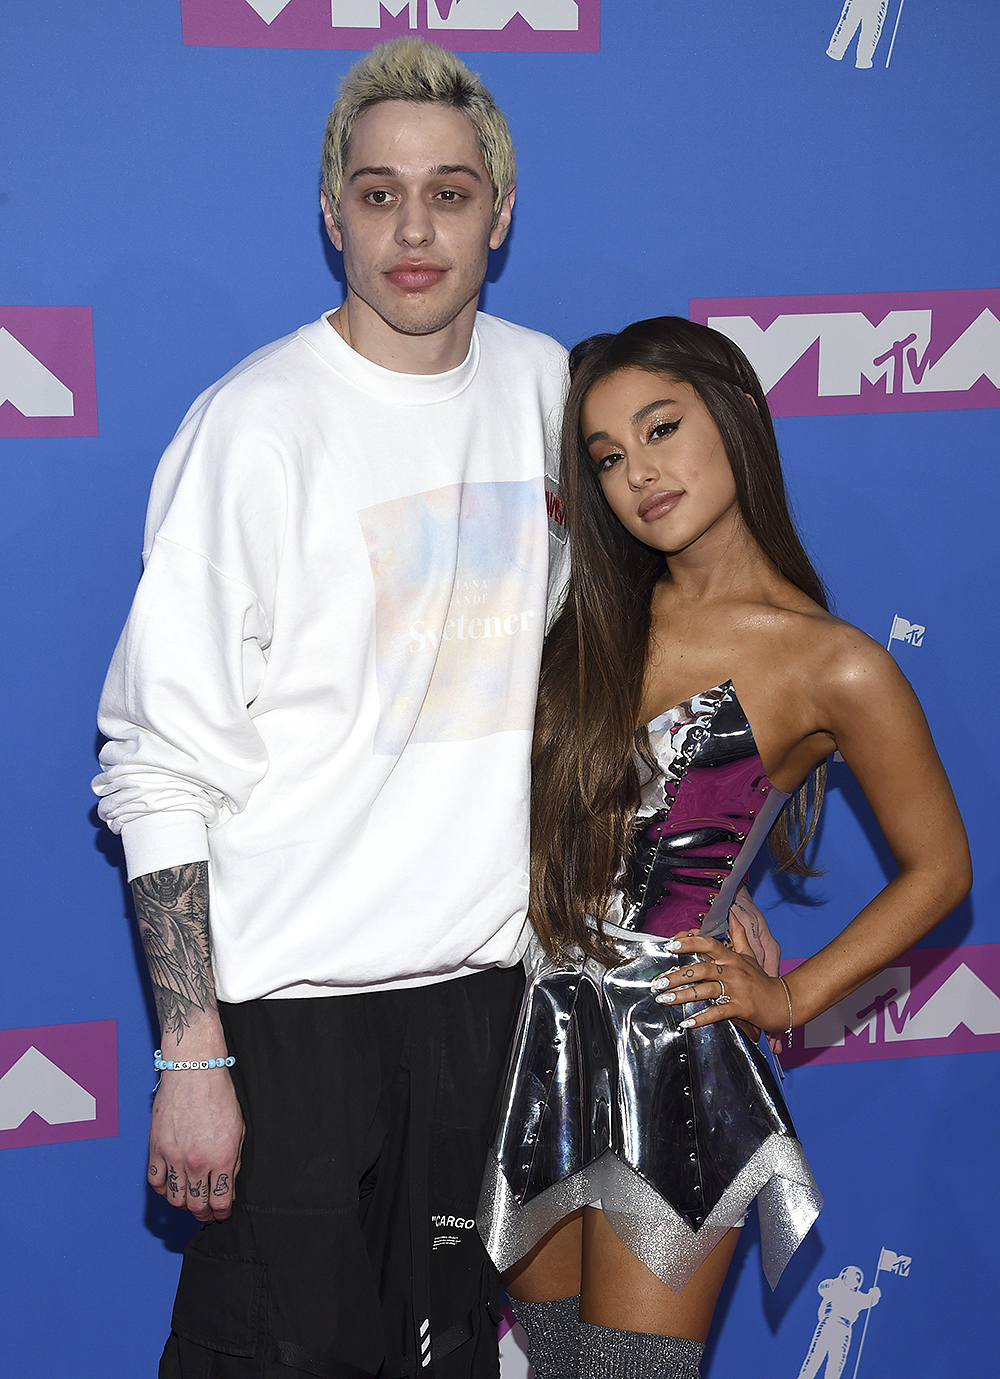 FILE- In this Aug. 20, 2018, file photo Pete Davidson, left, and Ariana Grande arrive at the MTV Video Music Awards at Radio City Music Hall in New York. Grande has released a song referencing her exes, including former fiance and “SNL” star Davidson and the late Mac Miller. (Photo by Evan Agostini/Invision/AP, File)